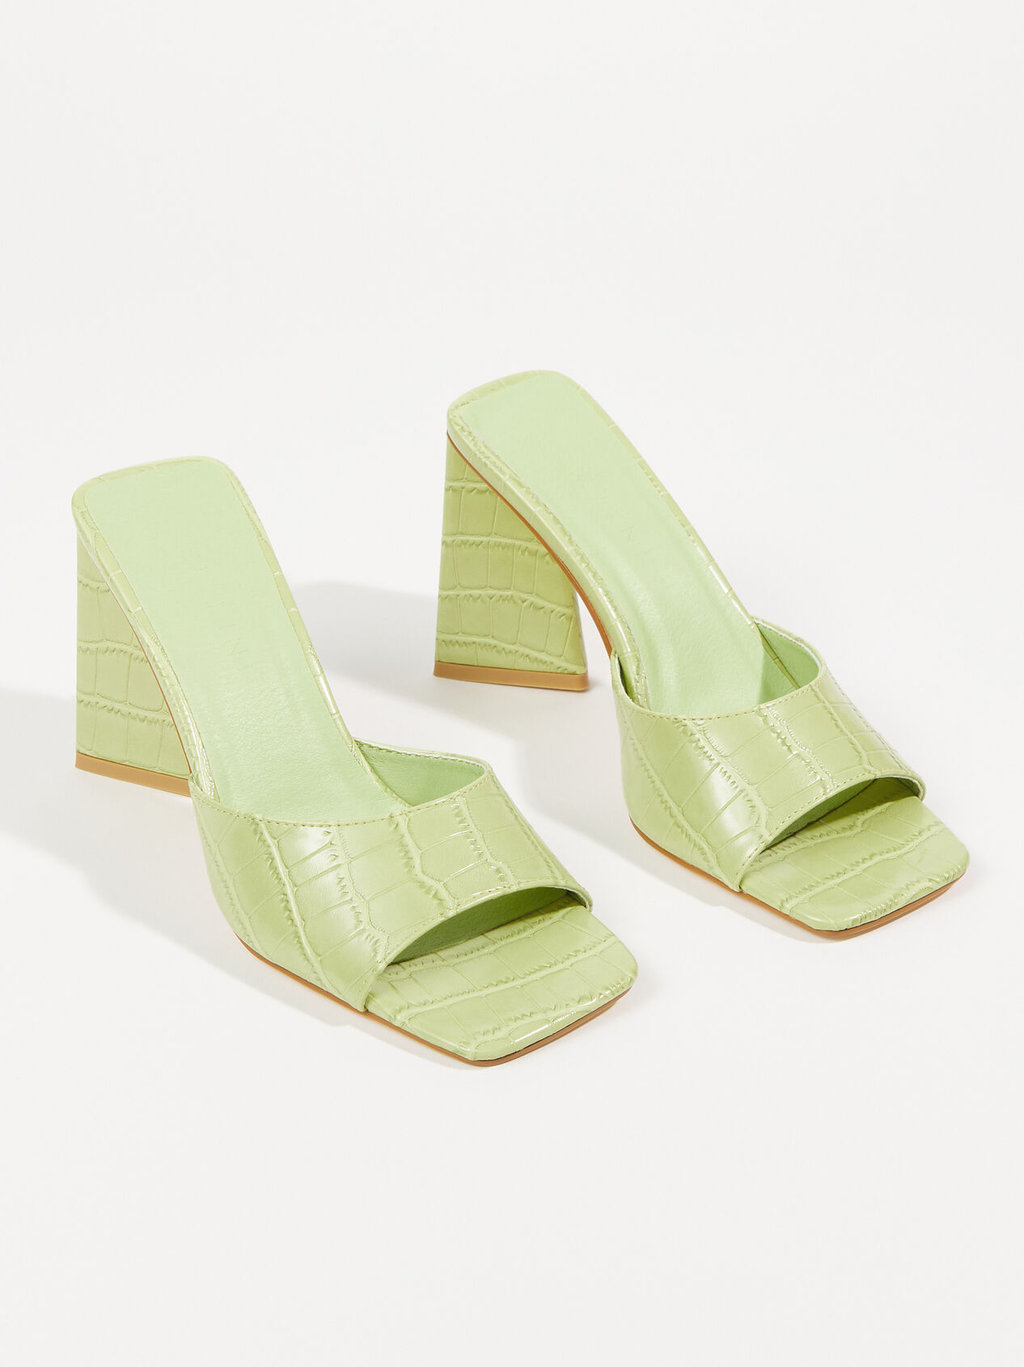 Green heels from Altar'd State